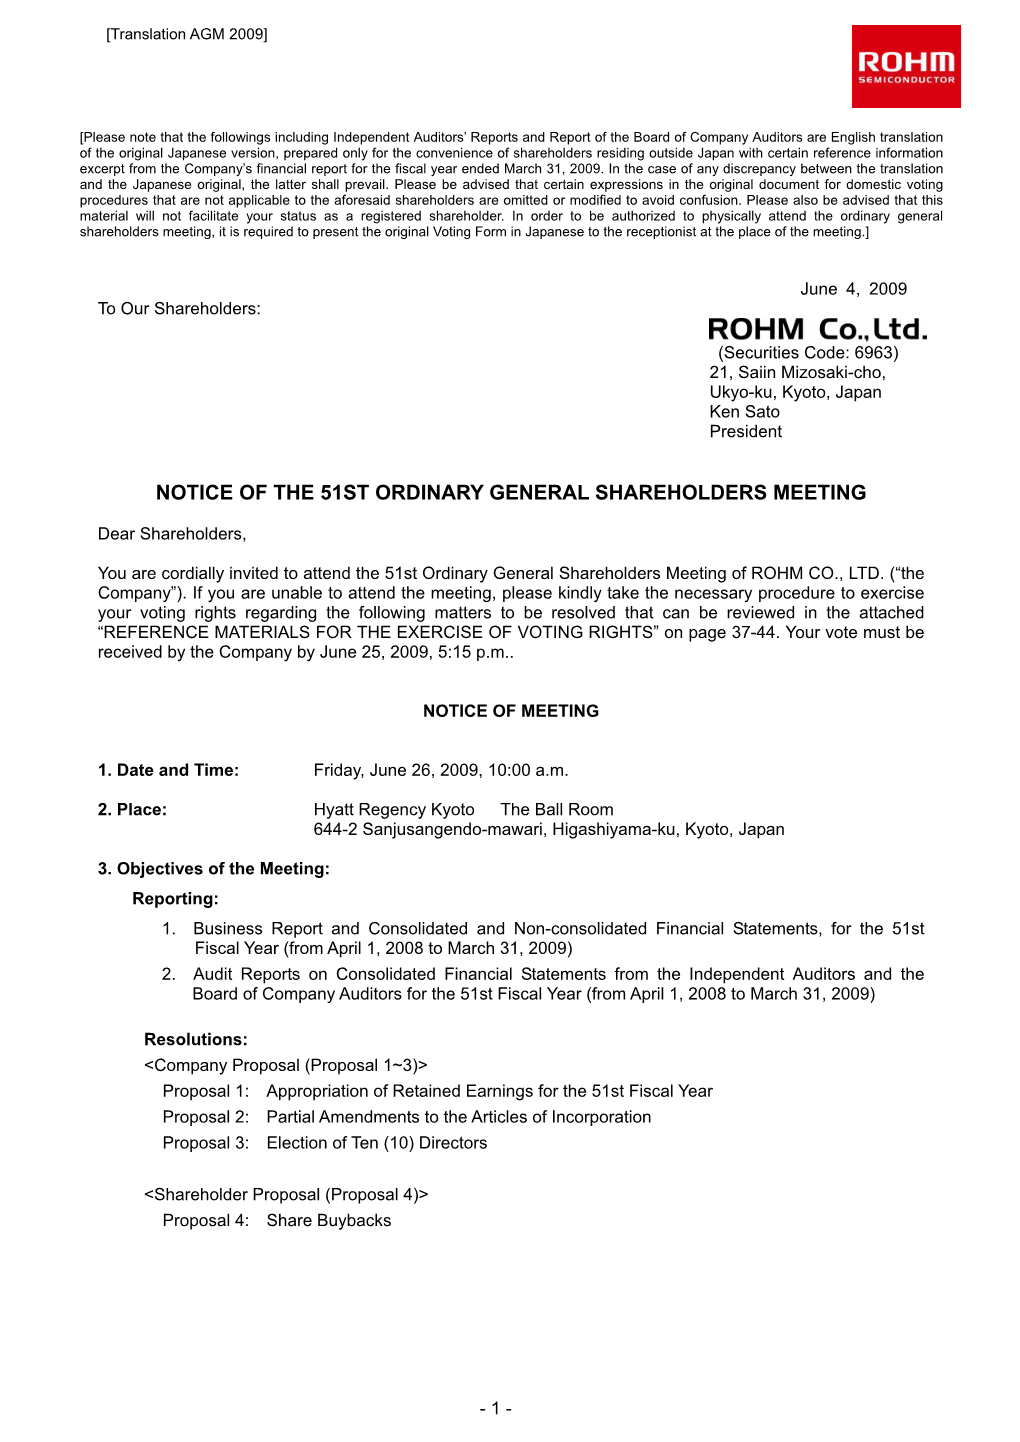 Notice of the 51St Ordinary General Shareholders Meeting